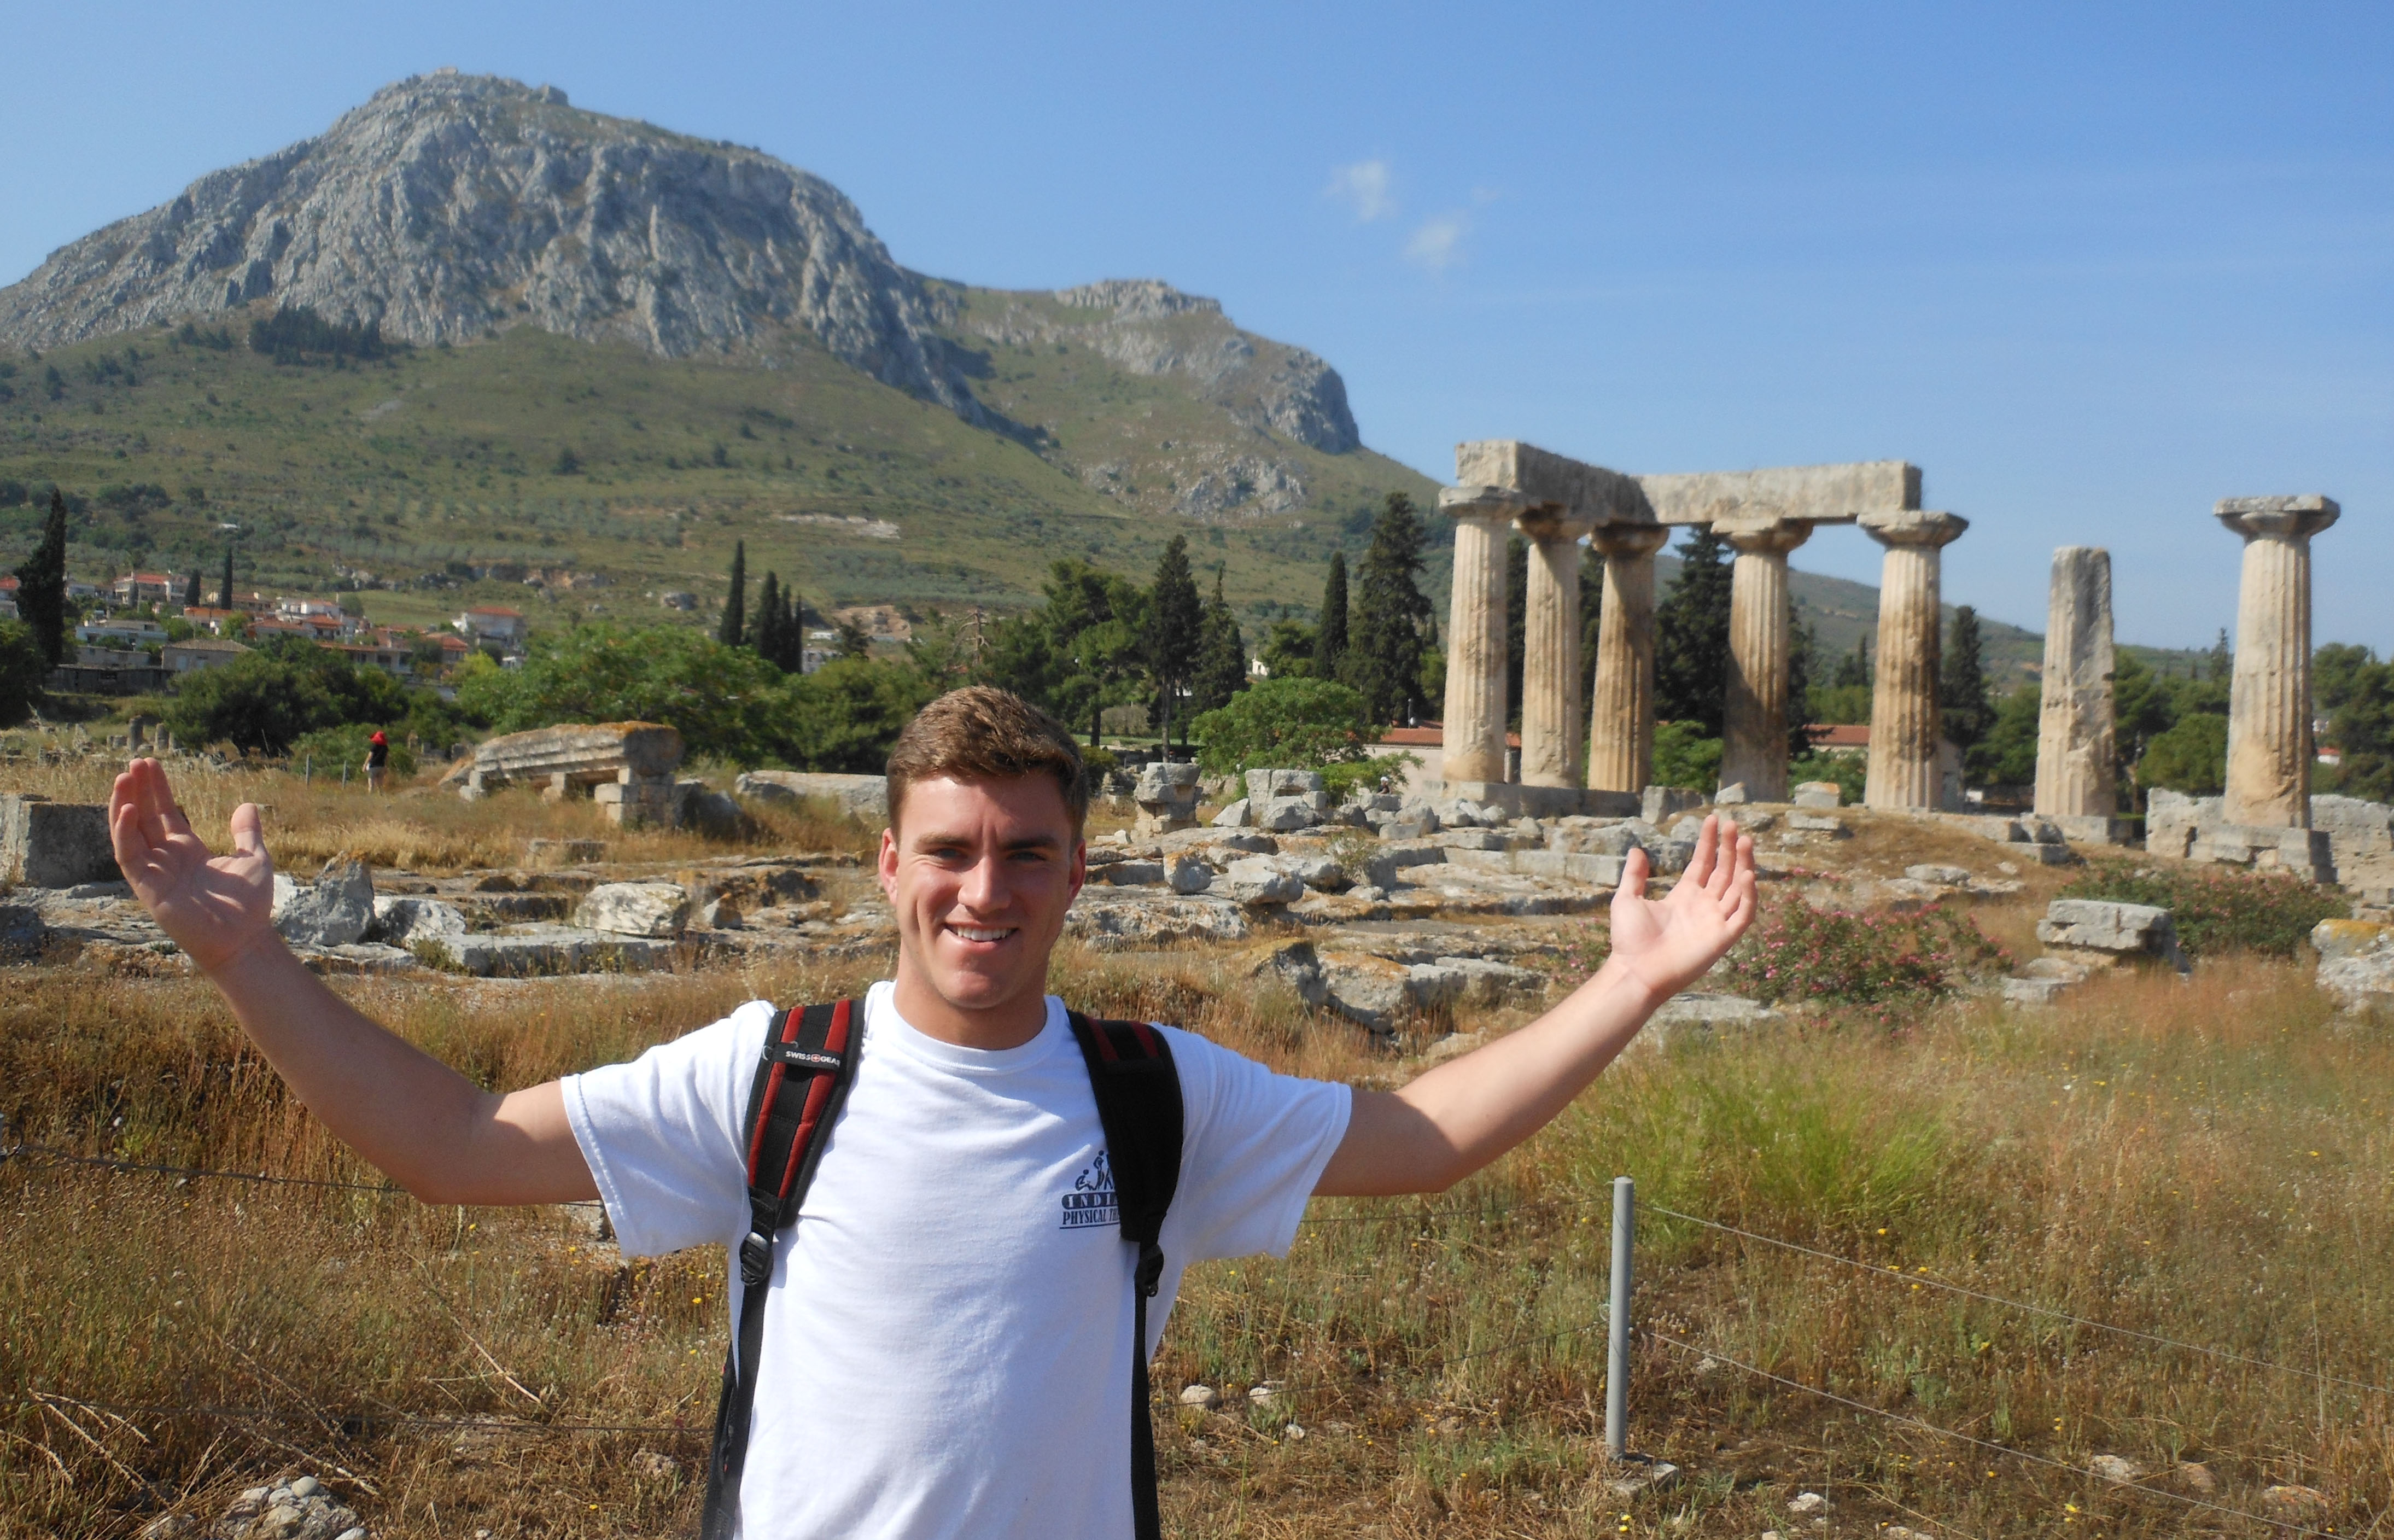 A photo by Derek Mong of Dr. Wickkiser's 2018 Athens immersion trip.